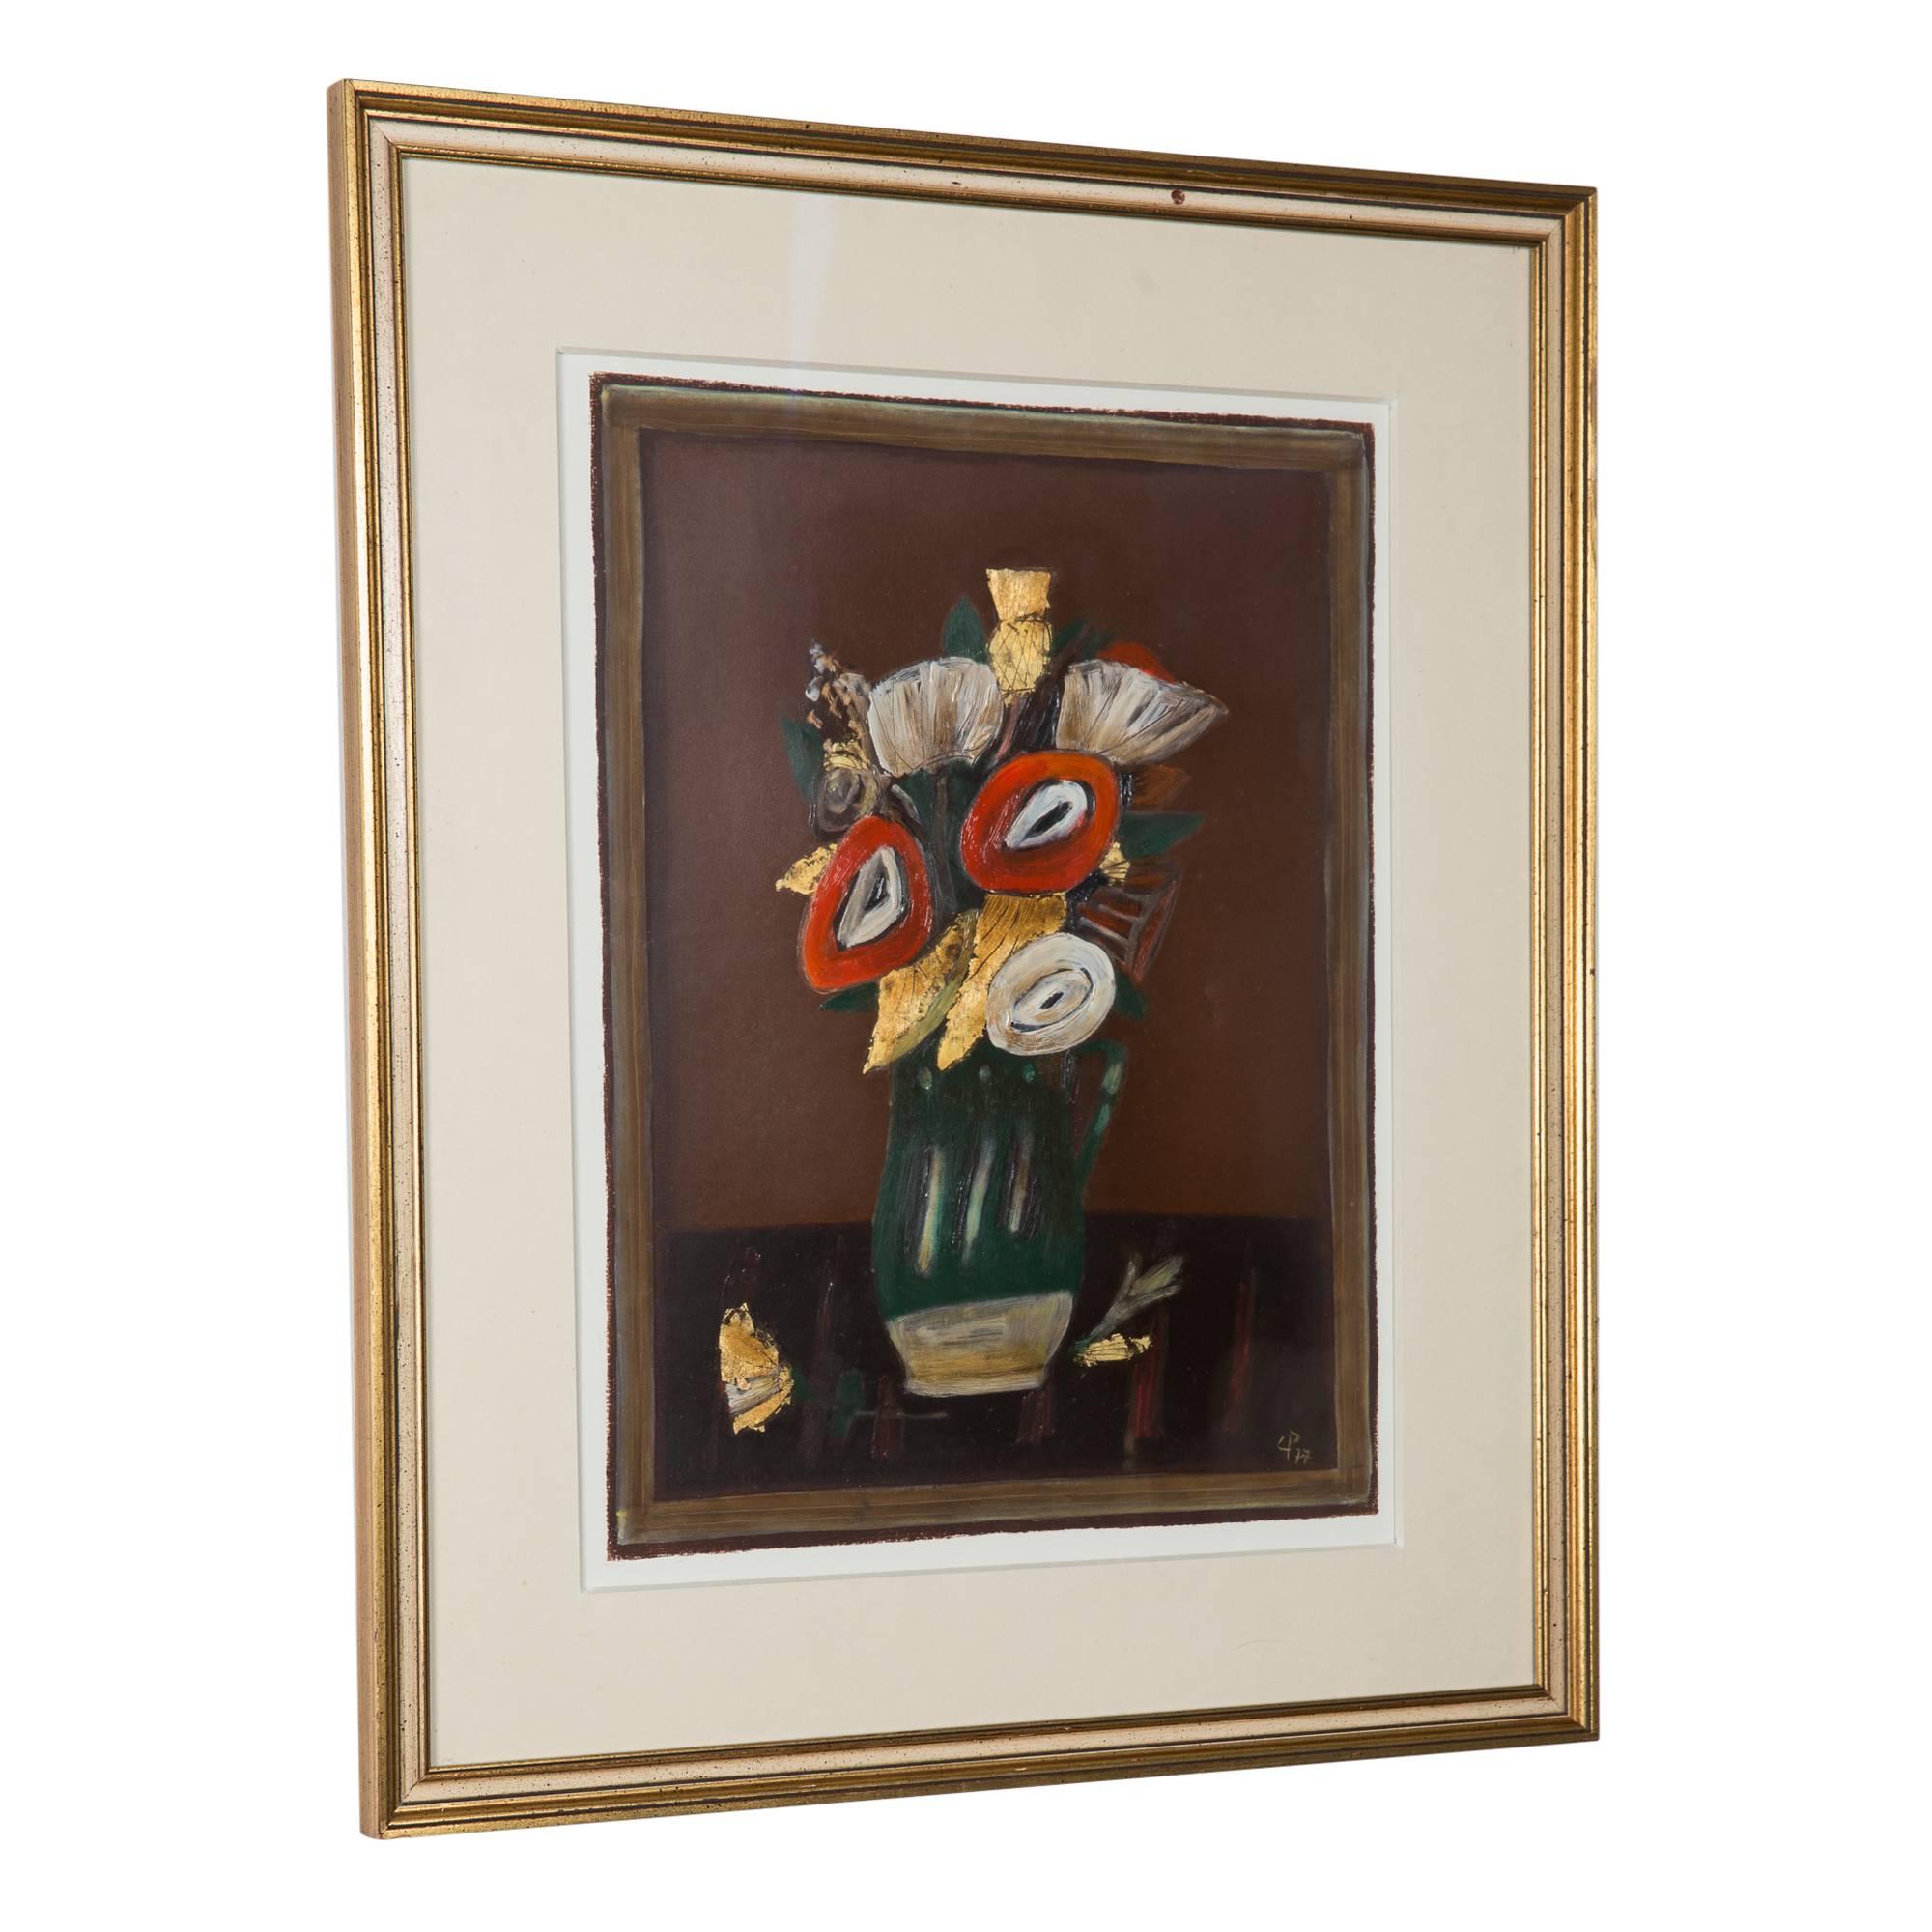 Oil on paper, still life, by Corneliu Petrescu (Romanian, 1925-2009). Dated lower right 77. Frame size: 25 1/2 in high, 21 1/2 in wide. Image size 18 1/2 in high, 14 3/8 in wide.
 